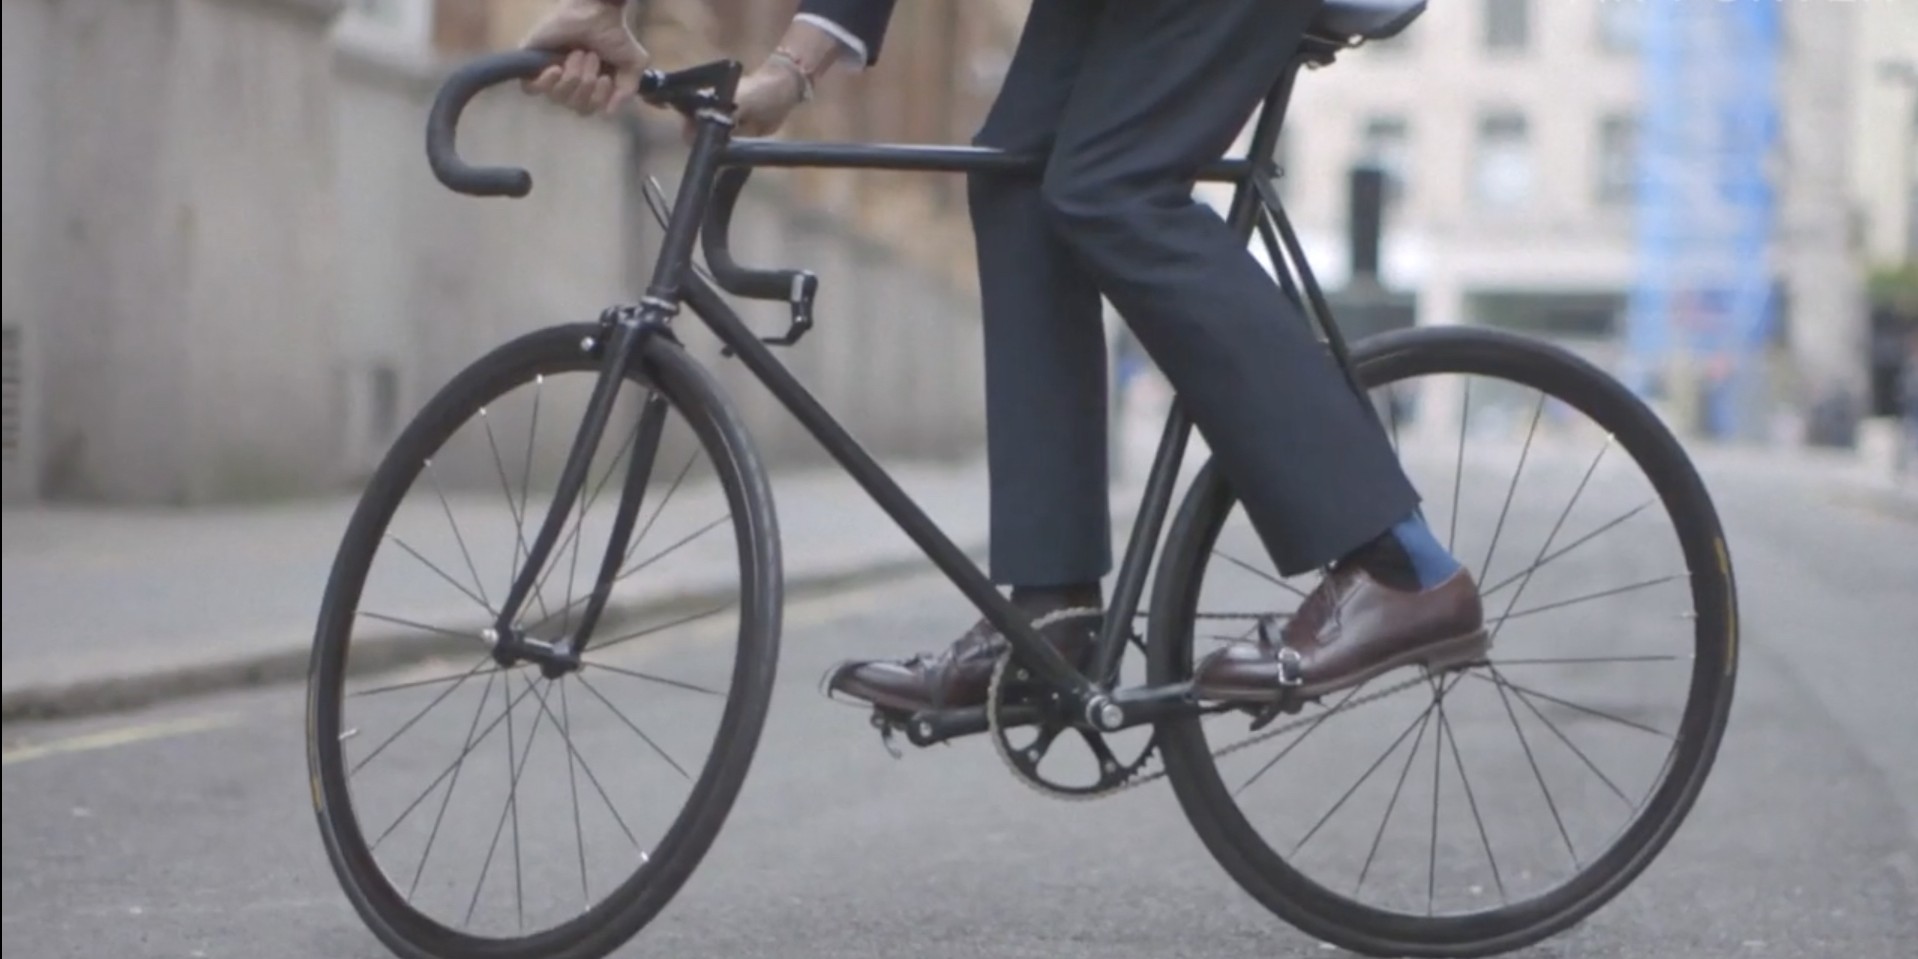 Fashion Designer In Blue Suit And Brown Leather Shoes Riding Custom Carbon Racing Bike On London City Street